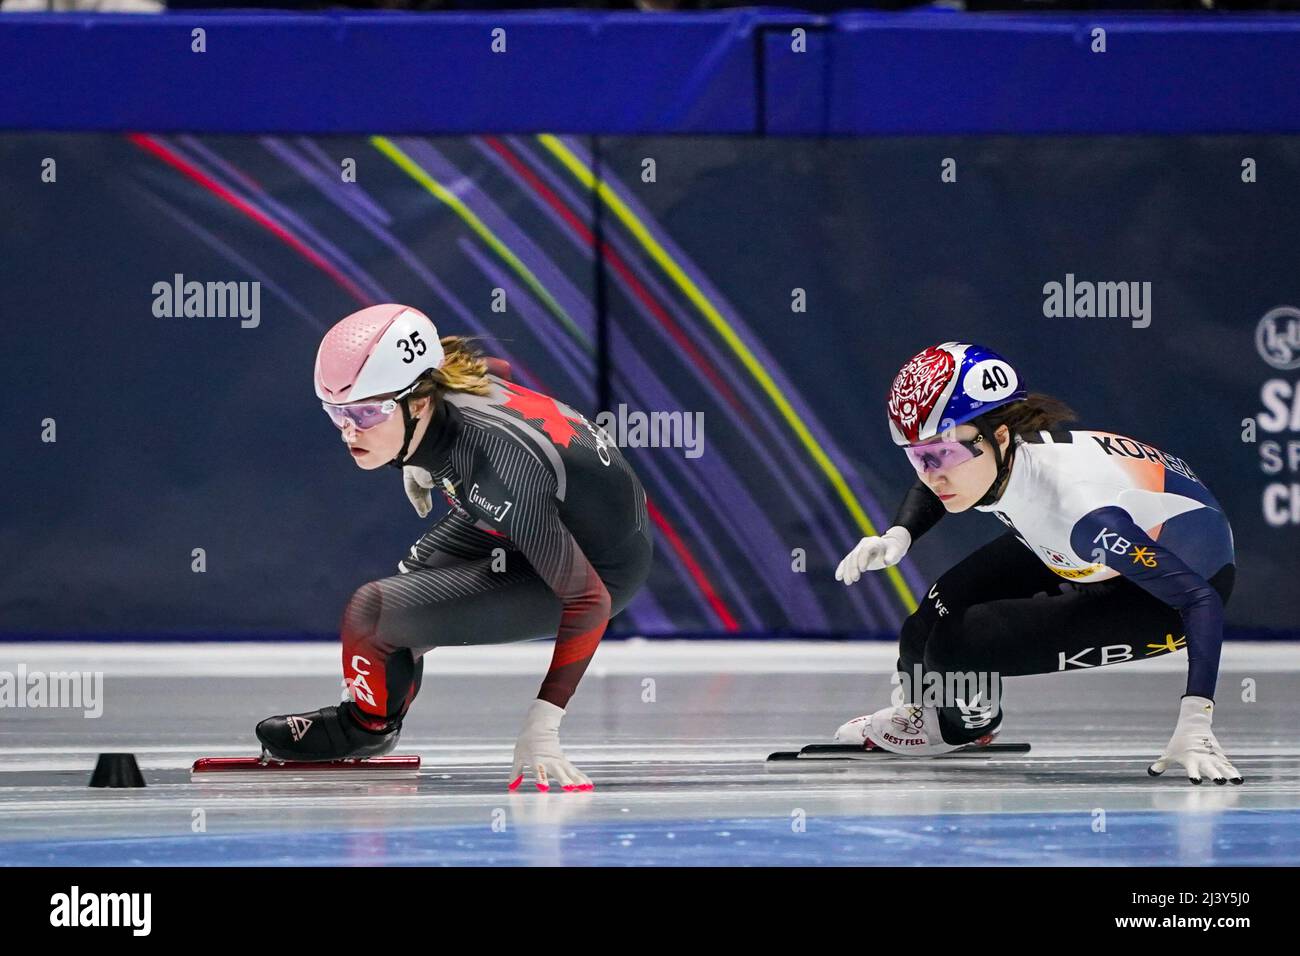 MONTREAL, CANADA - APRIL 10: Kim Boutin of Canada and Minjeong Choi of the Republic of Korea during Day 3 of the ISU World Short Track Championships at the Maurice Richard Arena on April 10, 2022 in Montreal, Canada (Photo by Andre Weening/Orange Pictures) Stock Photo